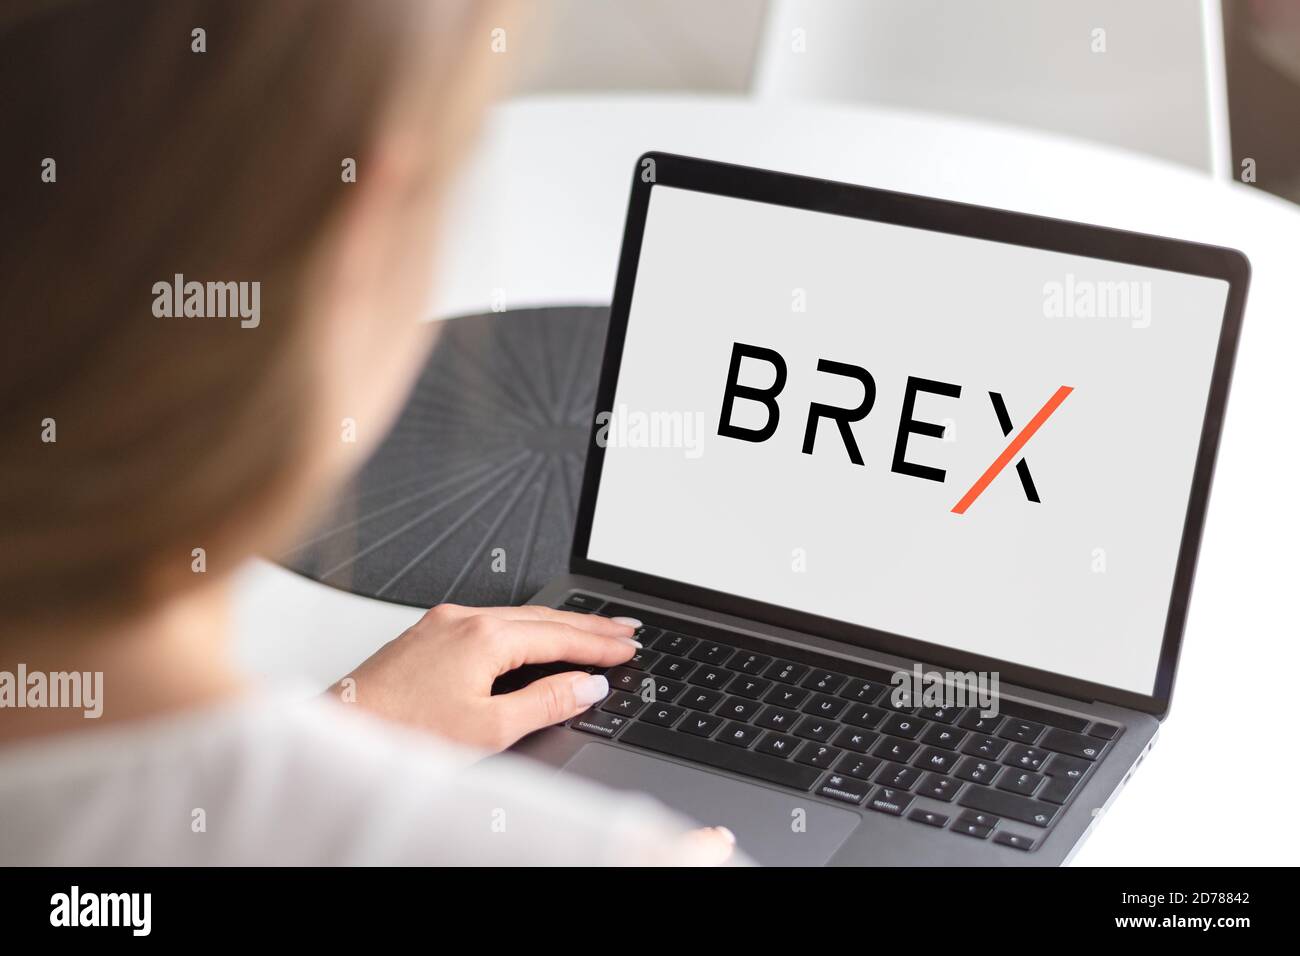 Guilherand-Granges, France - October 21, 2020. Notebook with Brex logo. American corporate designing credit cards for tech, e-commerce and life scienc Stock Photo